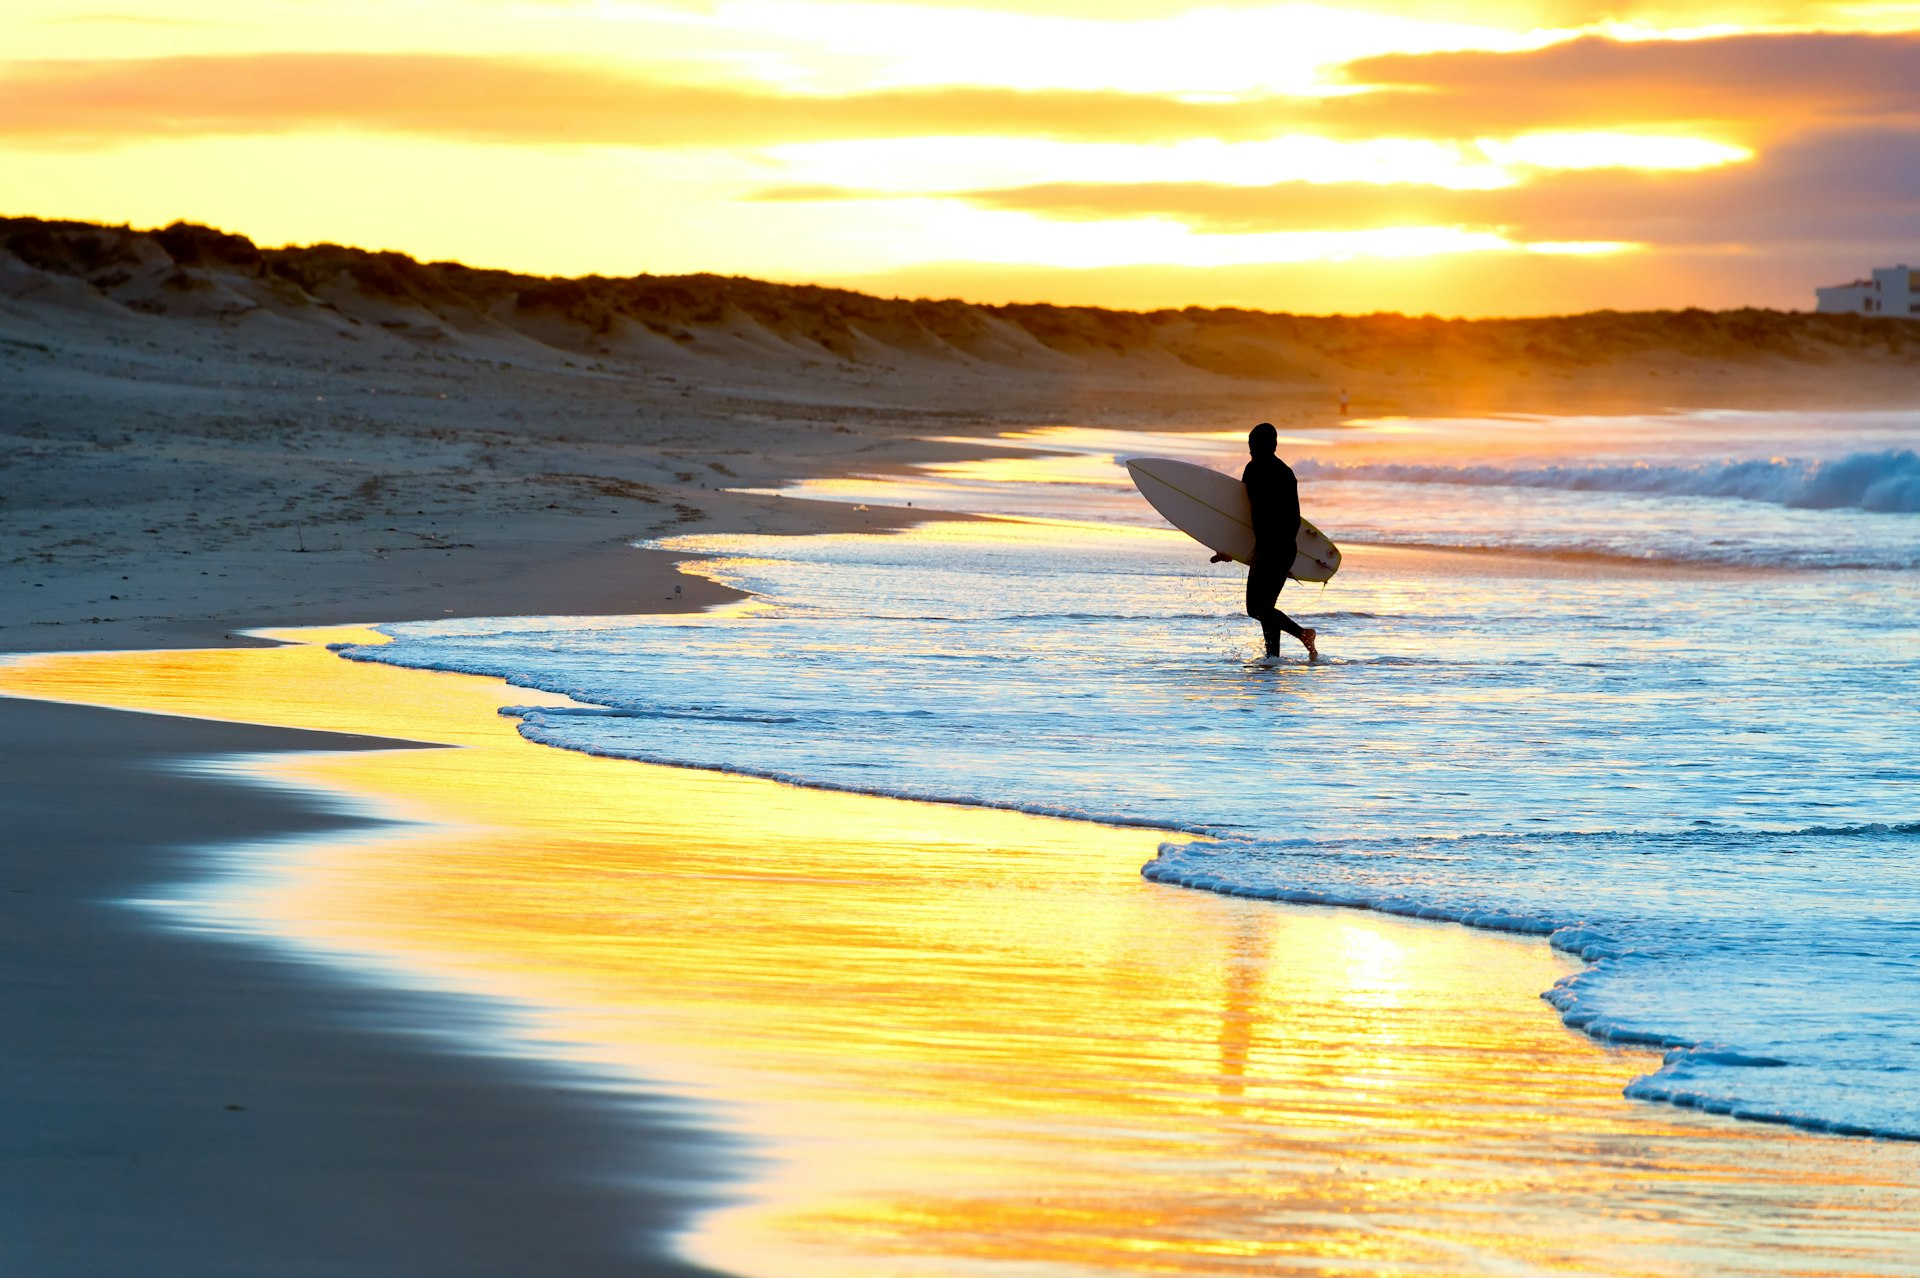 A surfer carrying a surfboard on the beach is is silhouetted against the setting sun